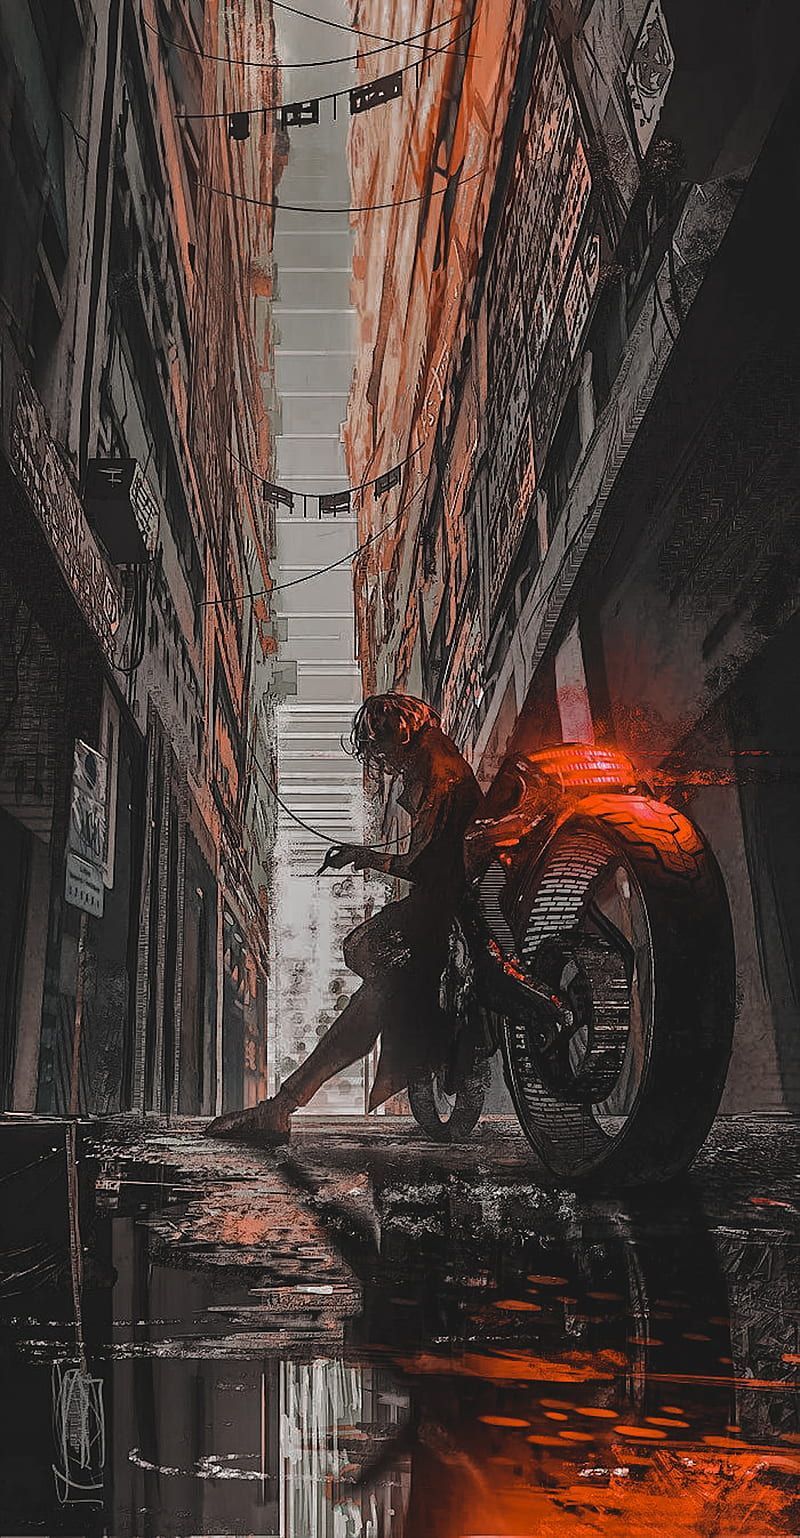 A woman sitting on a motorcycle in a city alley - Cyberpunk 2077